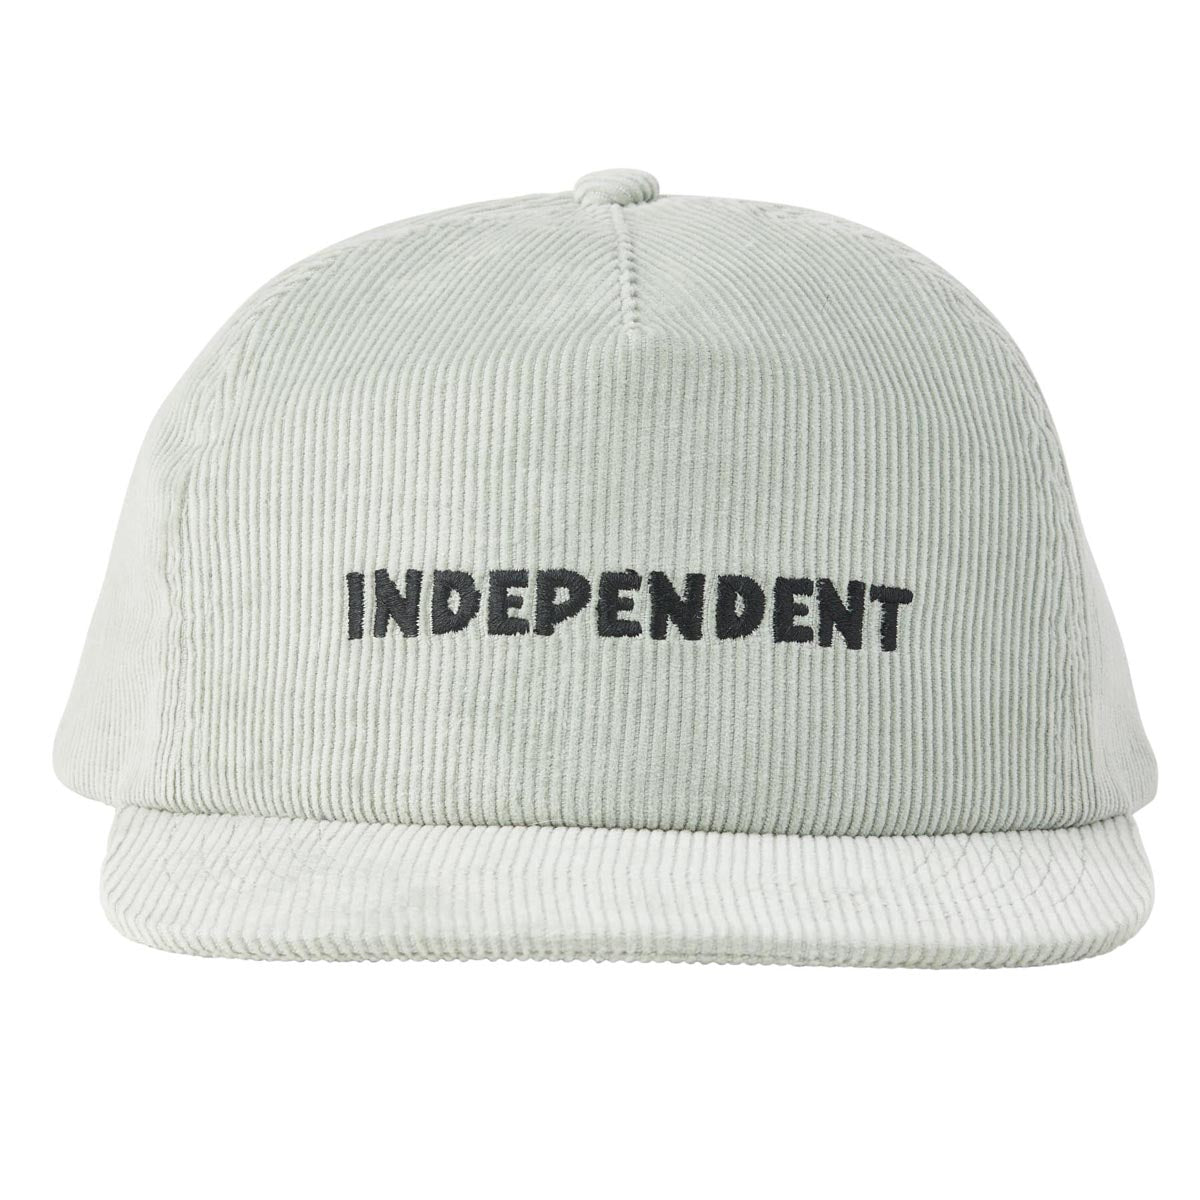 Independent Beacon Snapback Unstructured Hat - Grey image 2